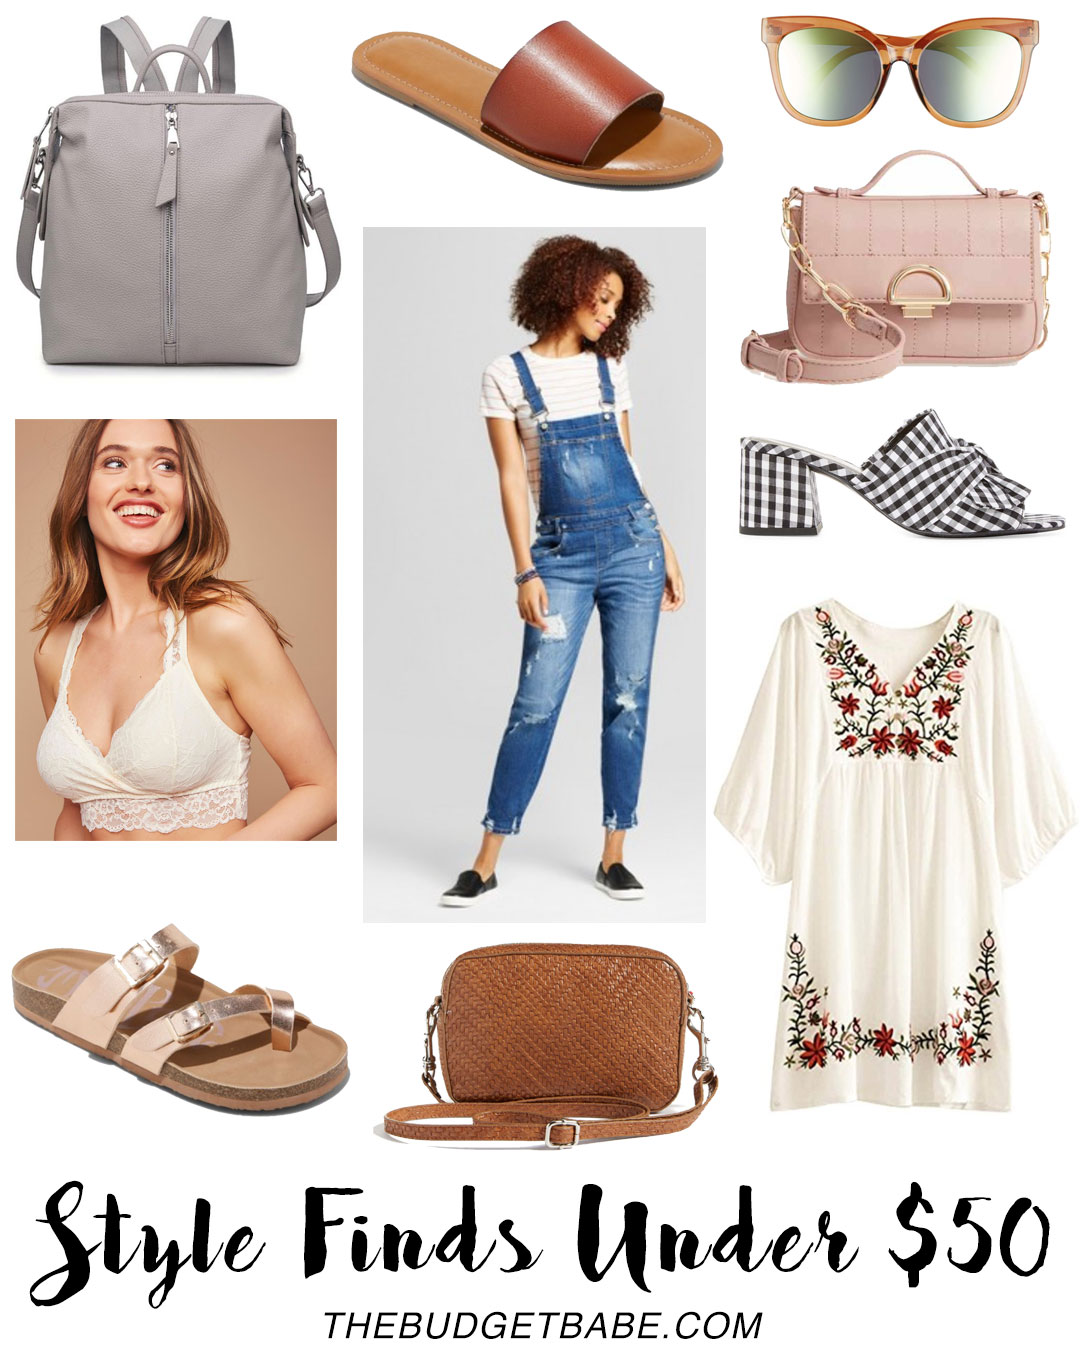 Style Finds Under $50 // Thebudgetbabe.com